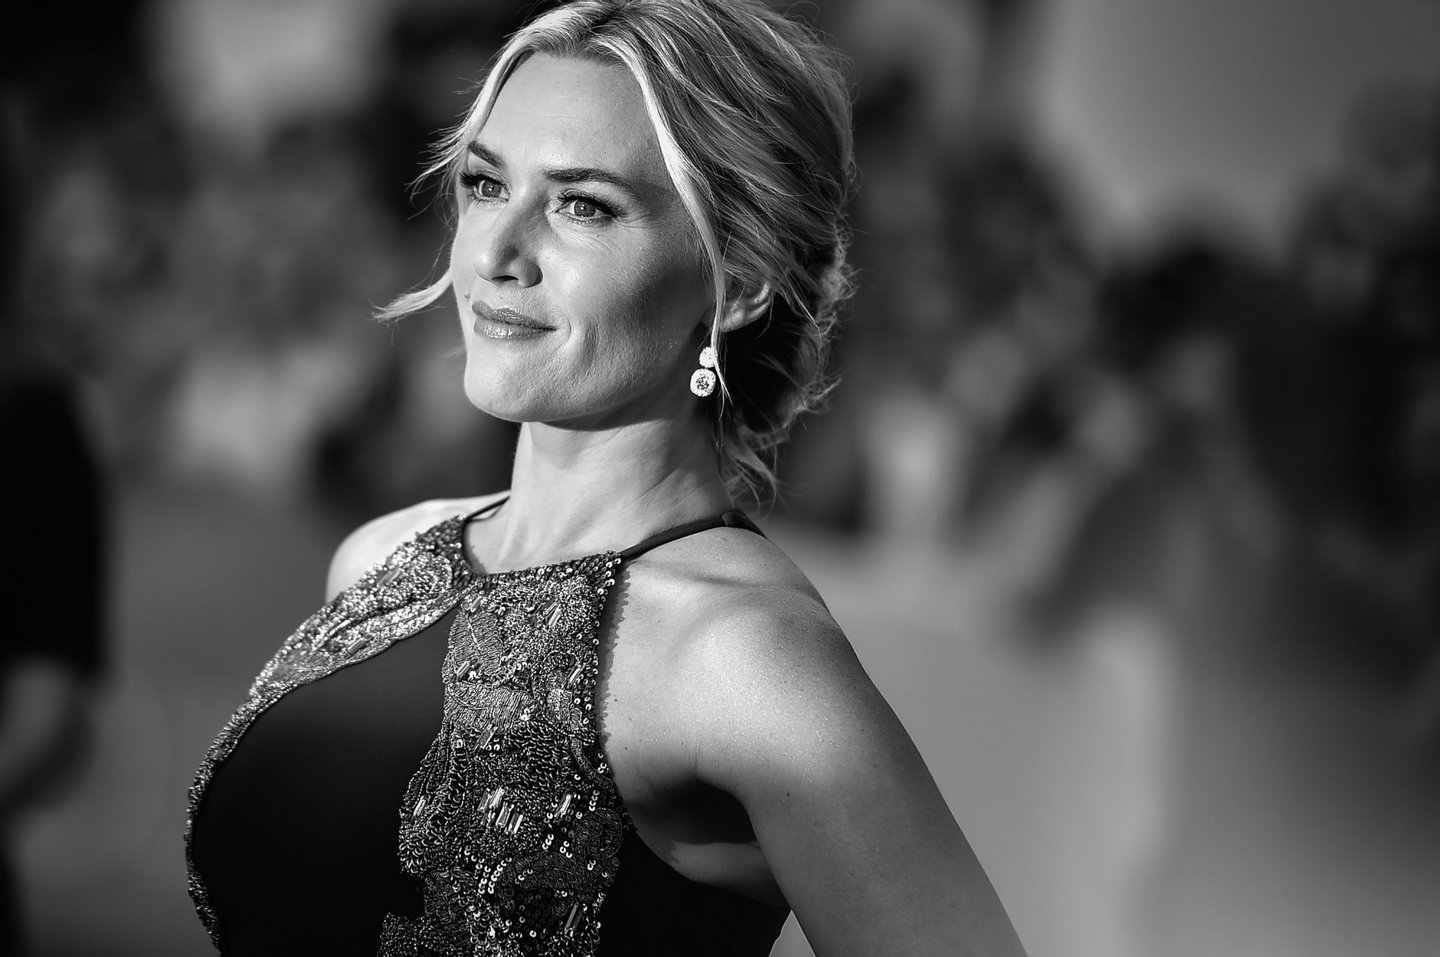 TORONTO, ON - SEPTEMBER 14: (EDITORS NOTE: Image was altered with digital filters) Actress Kate Winslet attends 'The Dressmaker' premiere during the 2015 Toronto International Film Festival at Roy Thomson Hall on September 14, 2015 in Toronto, Canada. (Photo by Mike Windle/Getty Images)